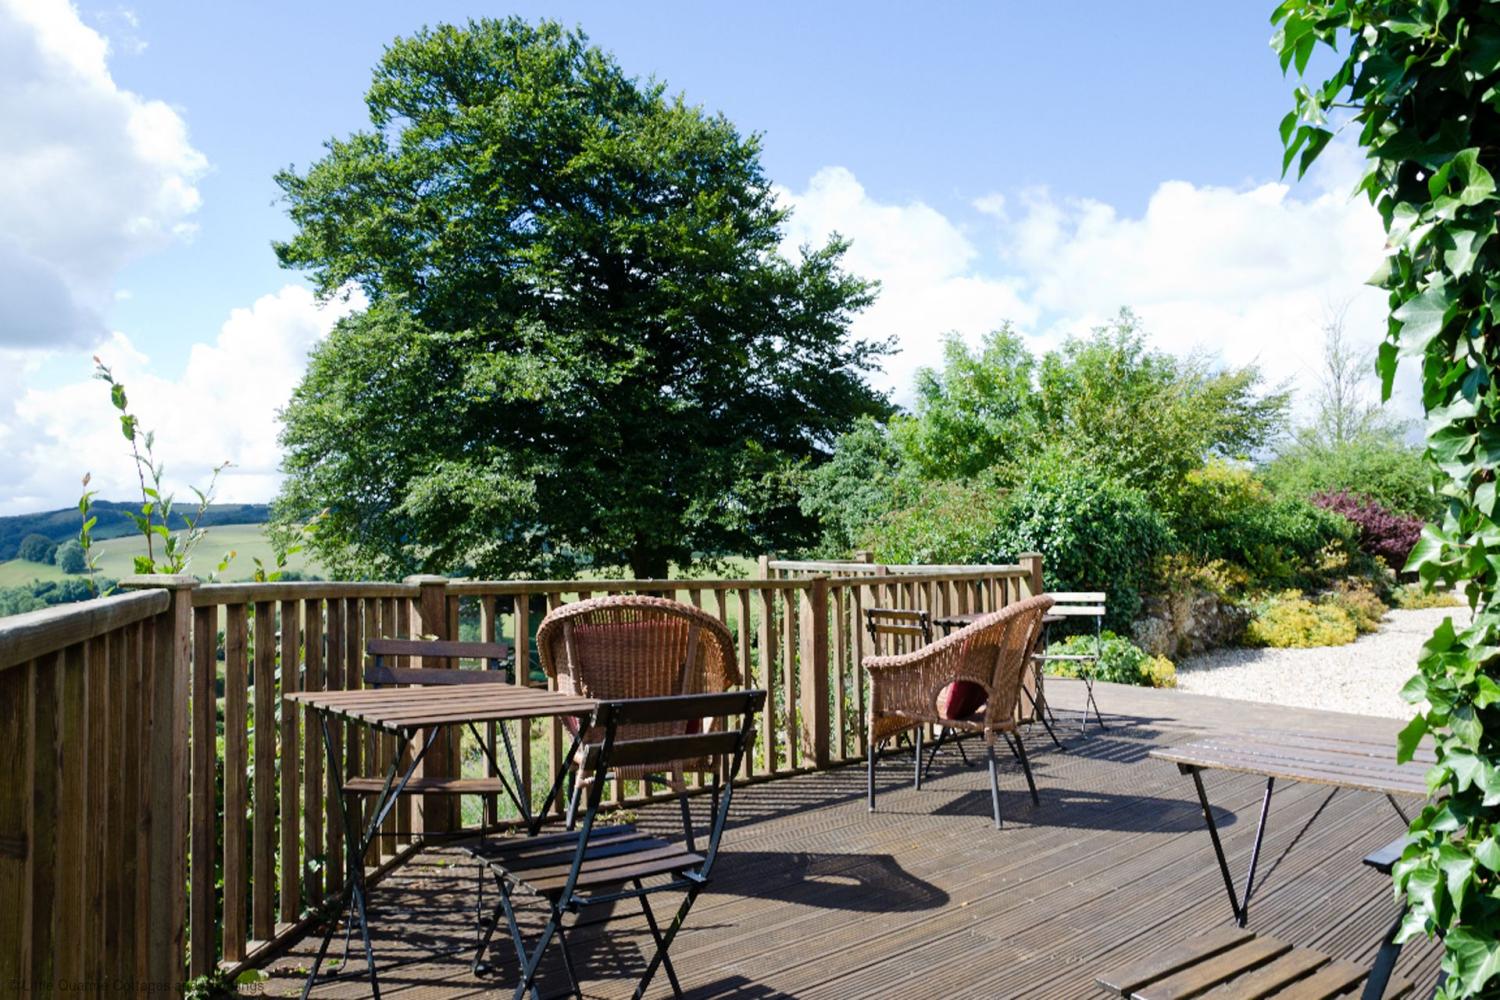 The decking wraps around the barn and is the perfect spot for an early morning cup of tea or an early evening G & T!